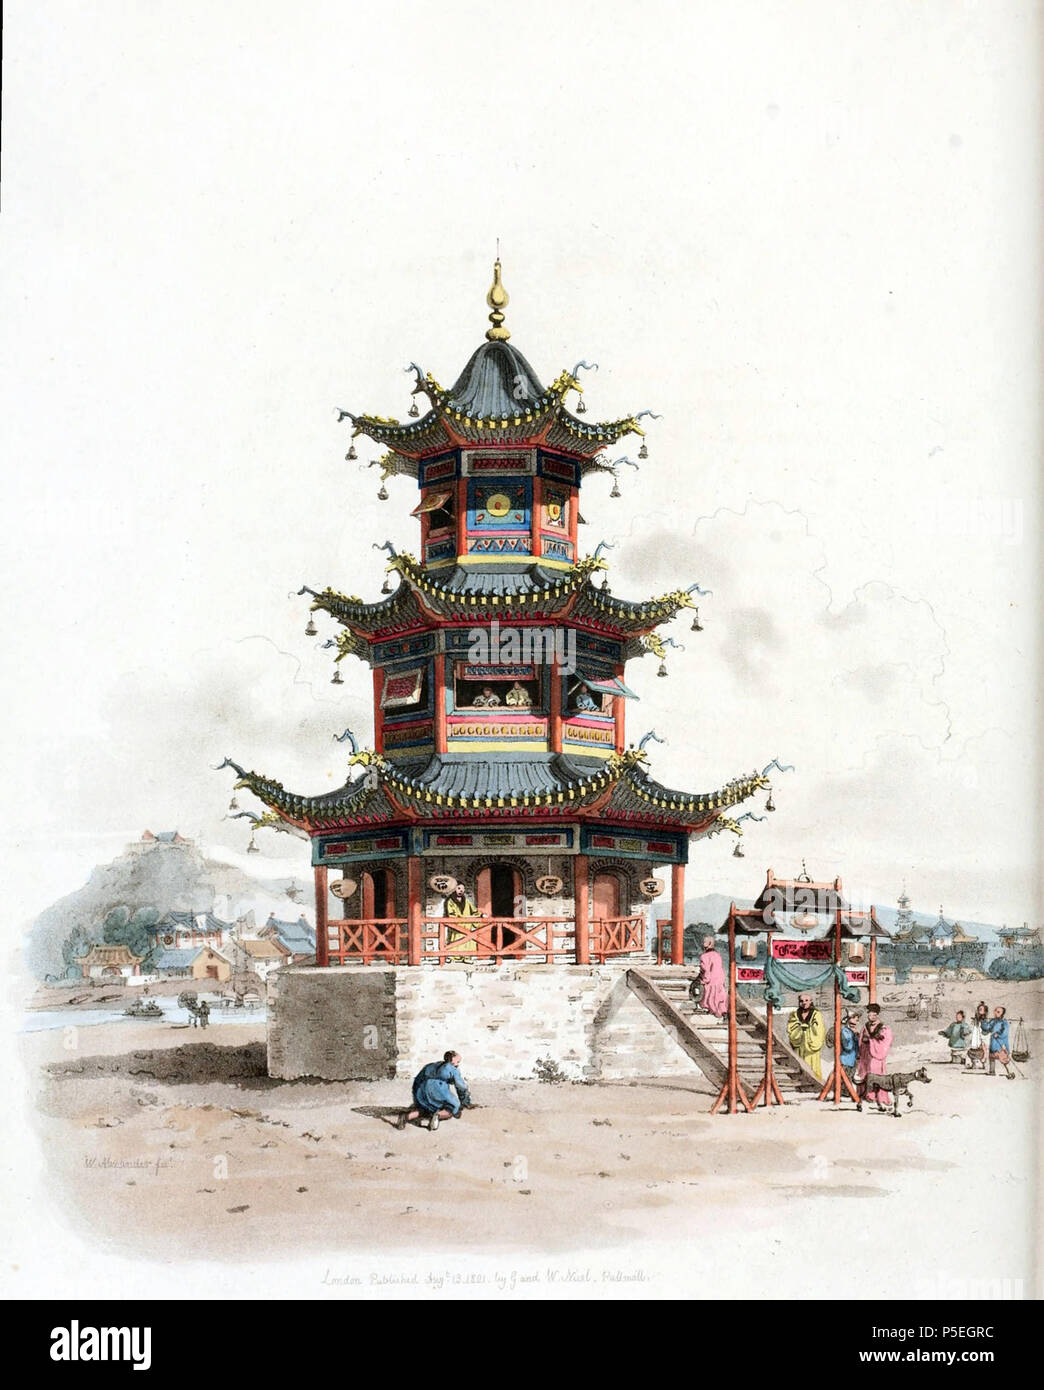 N/A. English: Drawing by William Alexander, draughtsman of the Macartney Embassy to China in 1793. A wooden temple on a stone foundation with a wooden gate at the beginning of its entrance staircase. The figures dressed in loose gowns are priests attending at the temple, and the background is a view of the city Tin-hai, November 21, 1793. Alexander noted that the Chinese were scrupulously observant of moral and religious duties and norms; and their country abounded with temples, of various forms, to which they resorted on every occasion, and offered their sacrifices. Besides the temples, in al Stock Photo